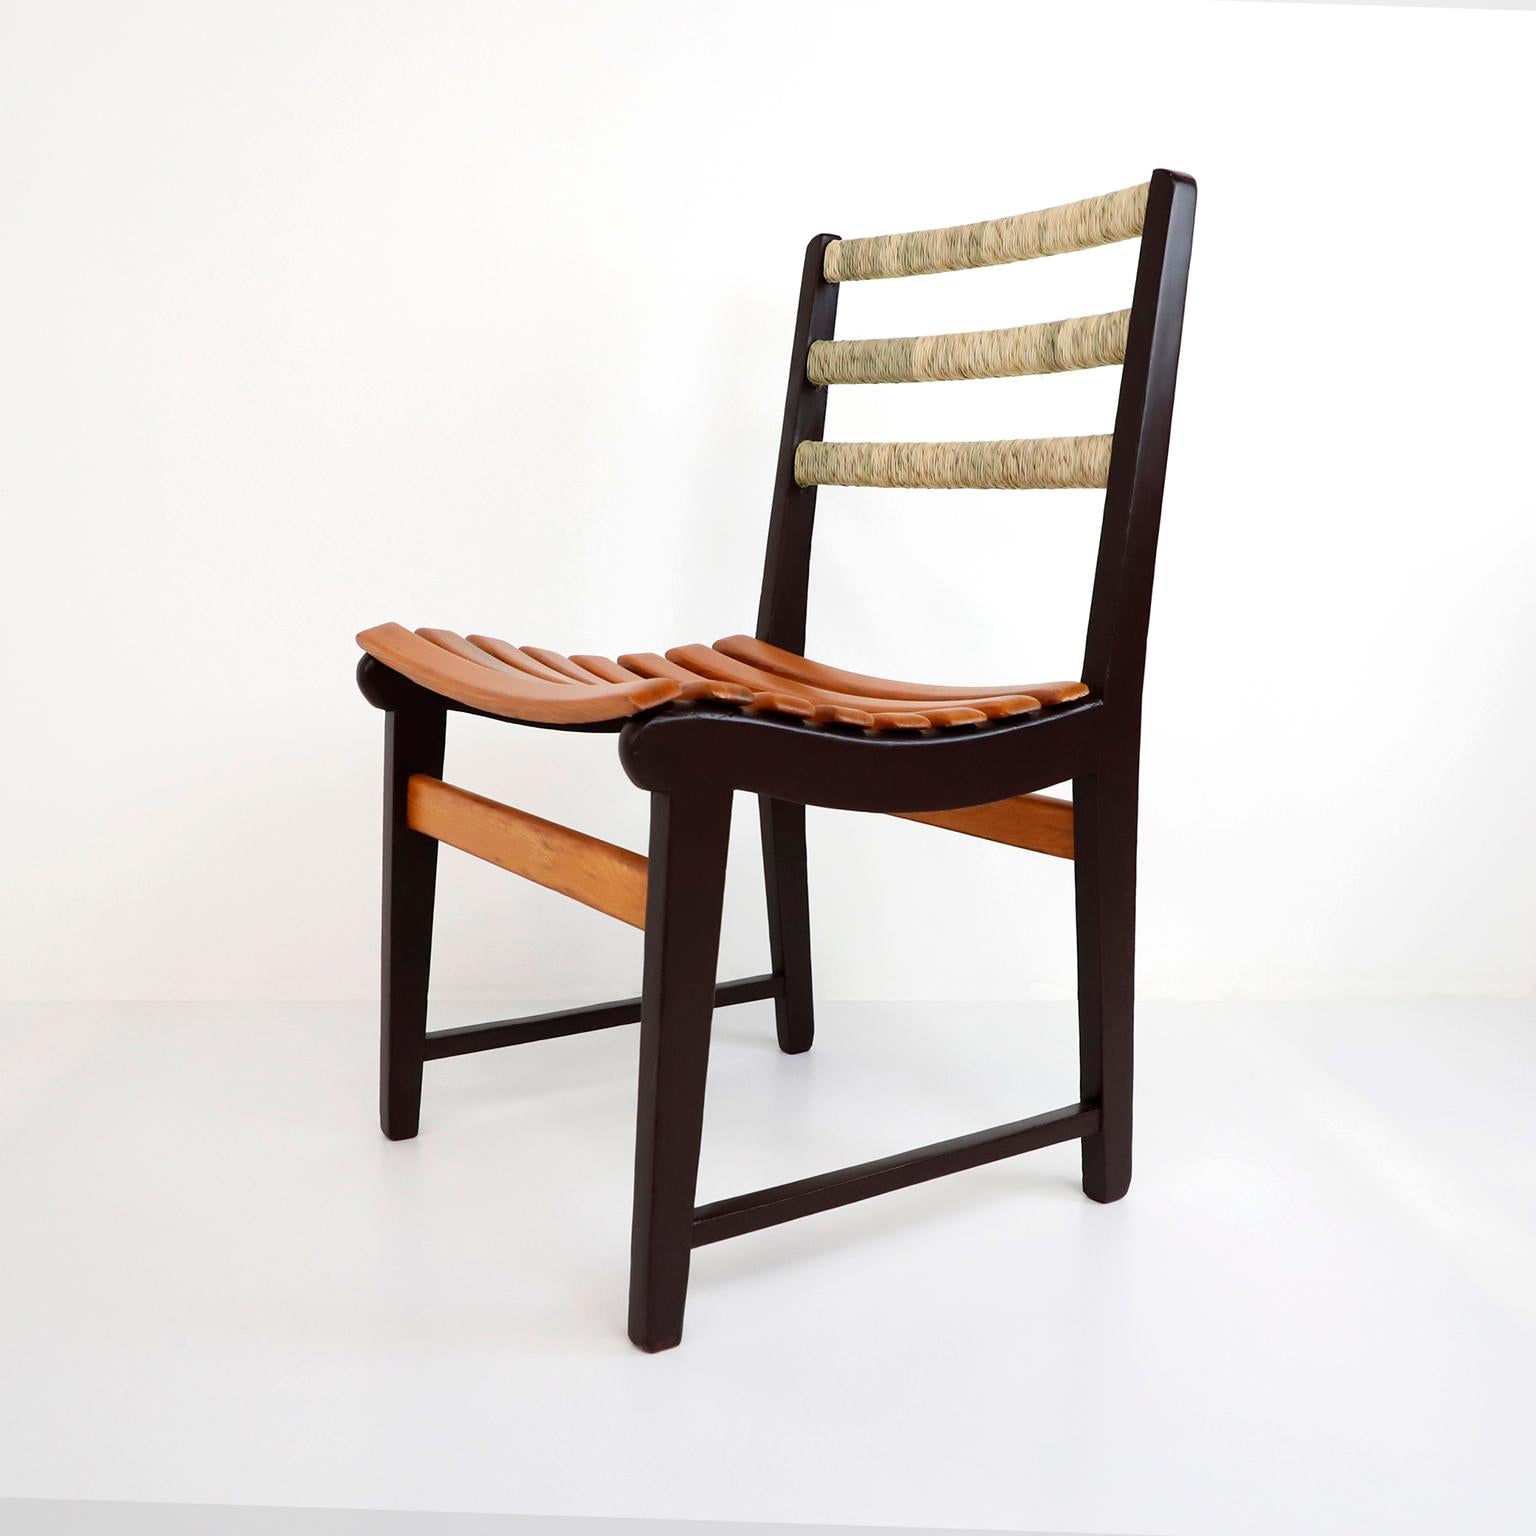 We offer this original Set of Six Chairs by Michael Van Beuren for Domus in pine wood and with the characteristic Terracota Van Beuren color, designed by the American Bauhaus designer, Michael Van Beuren in Mexico, circa 1950, this handmade, solid